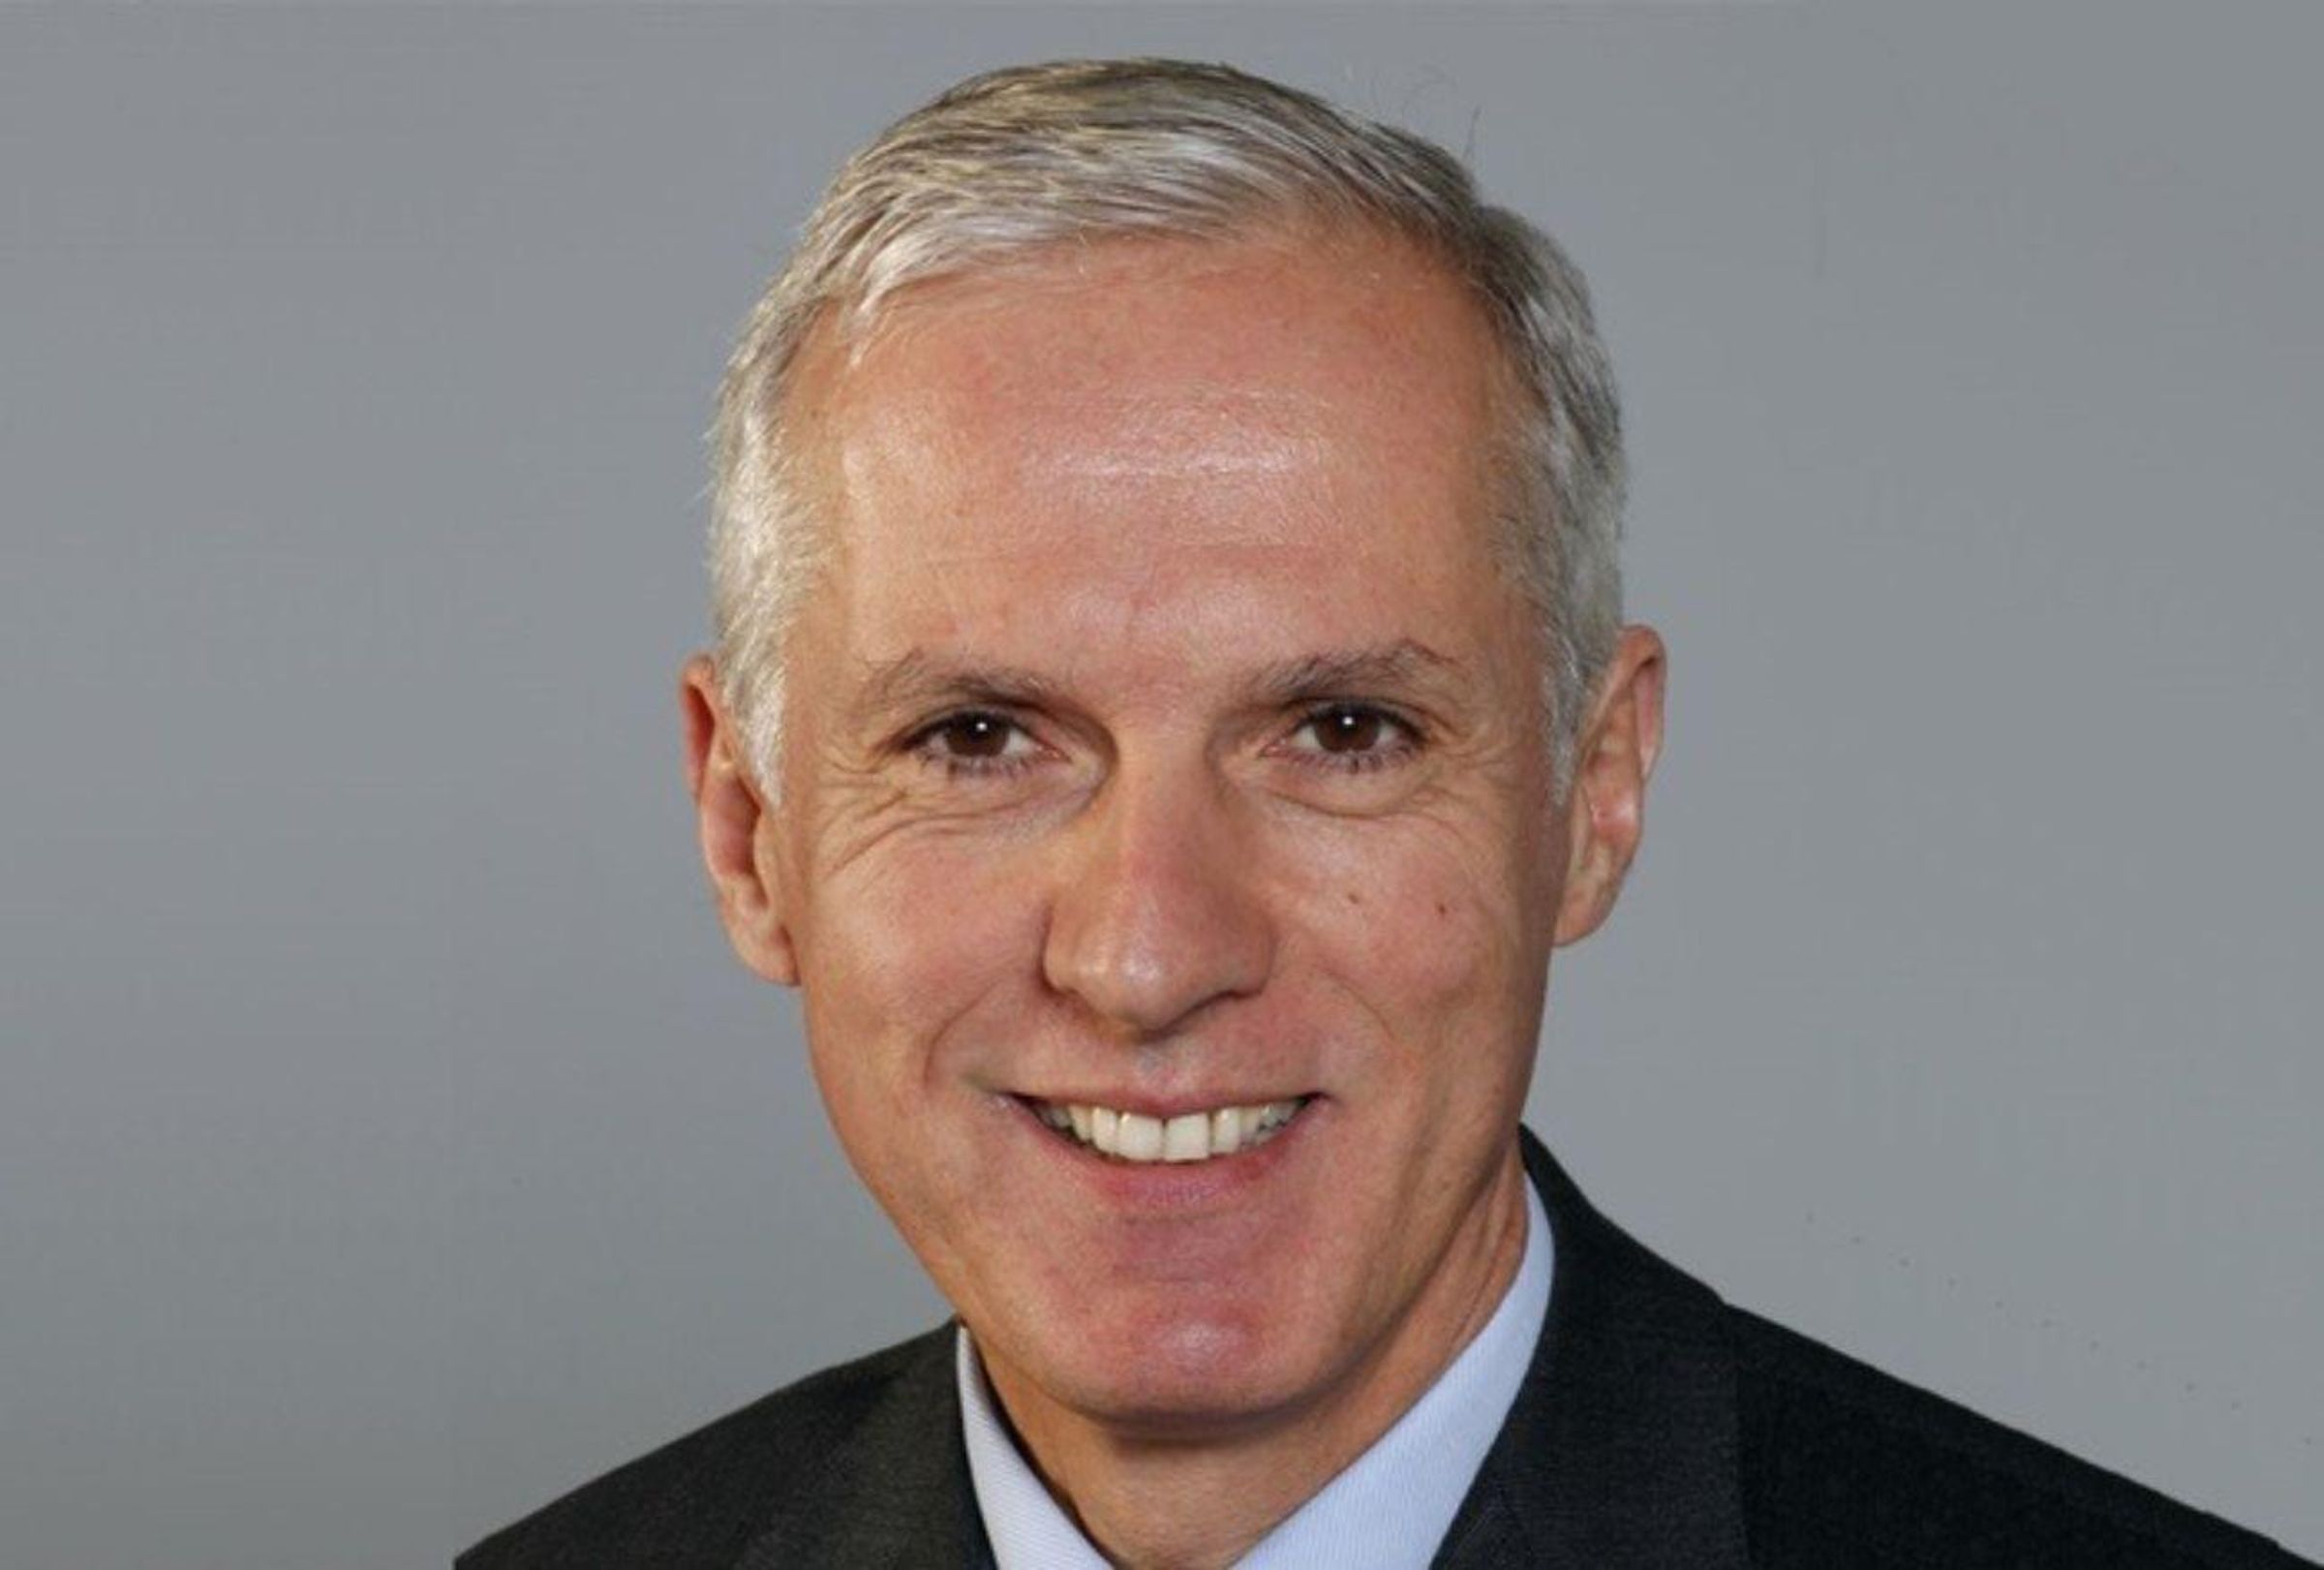 Gilles Schnepp - Independent director at the Board of Directors of Sanofi, Chairman of the Appointments, Governance and CSR Committee and Member of the Strategy Committee